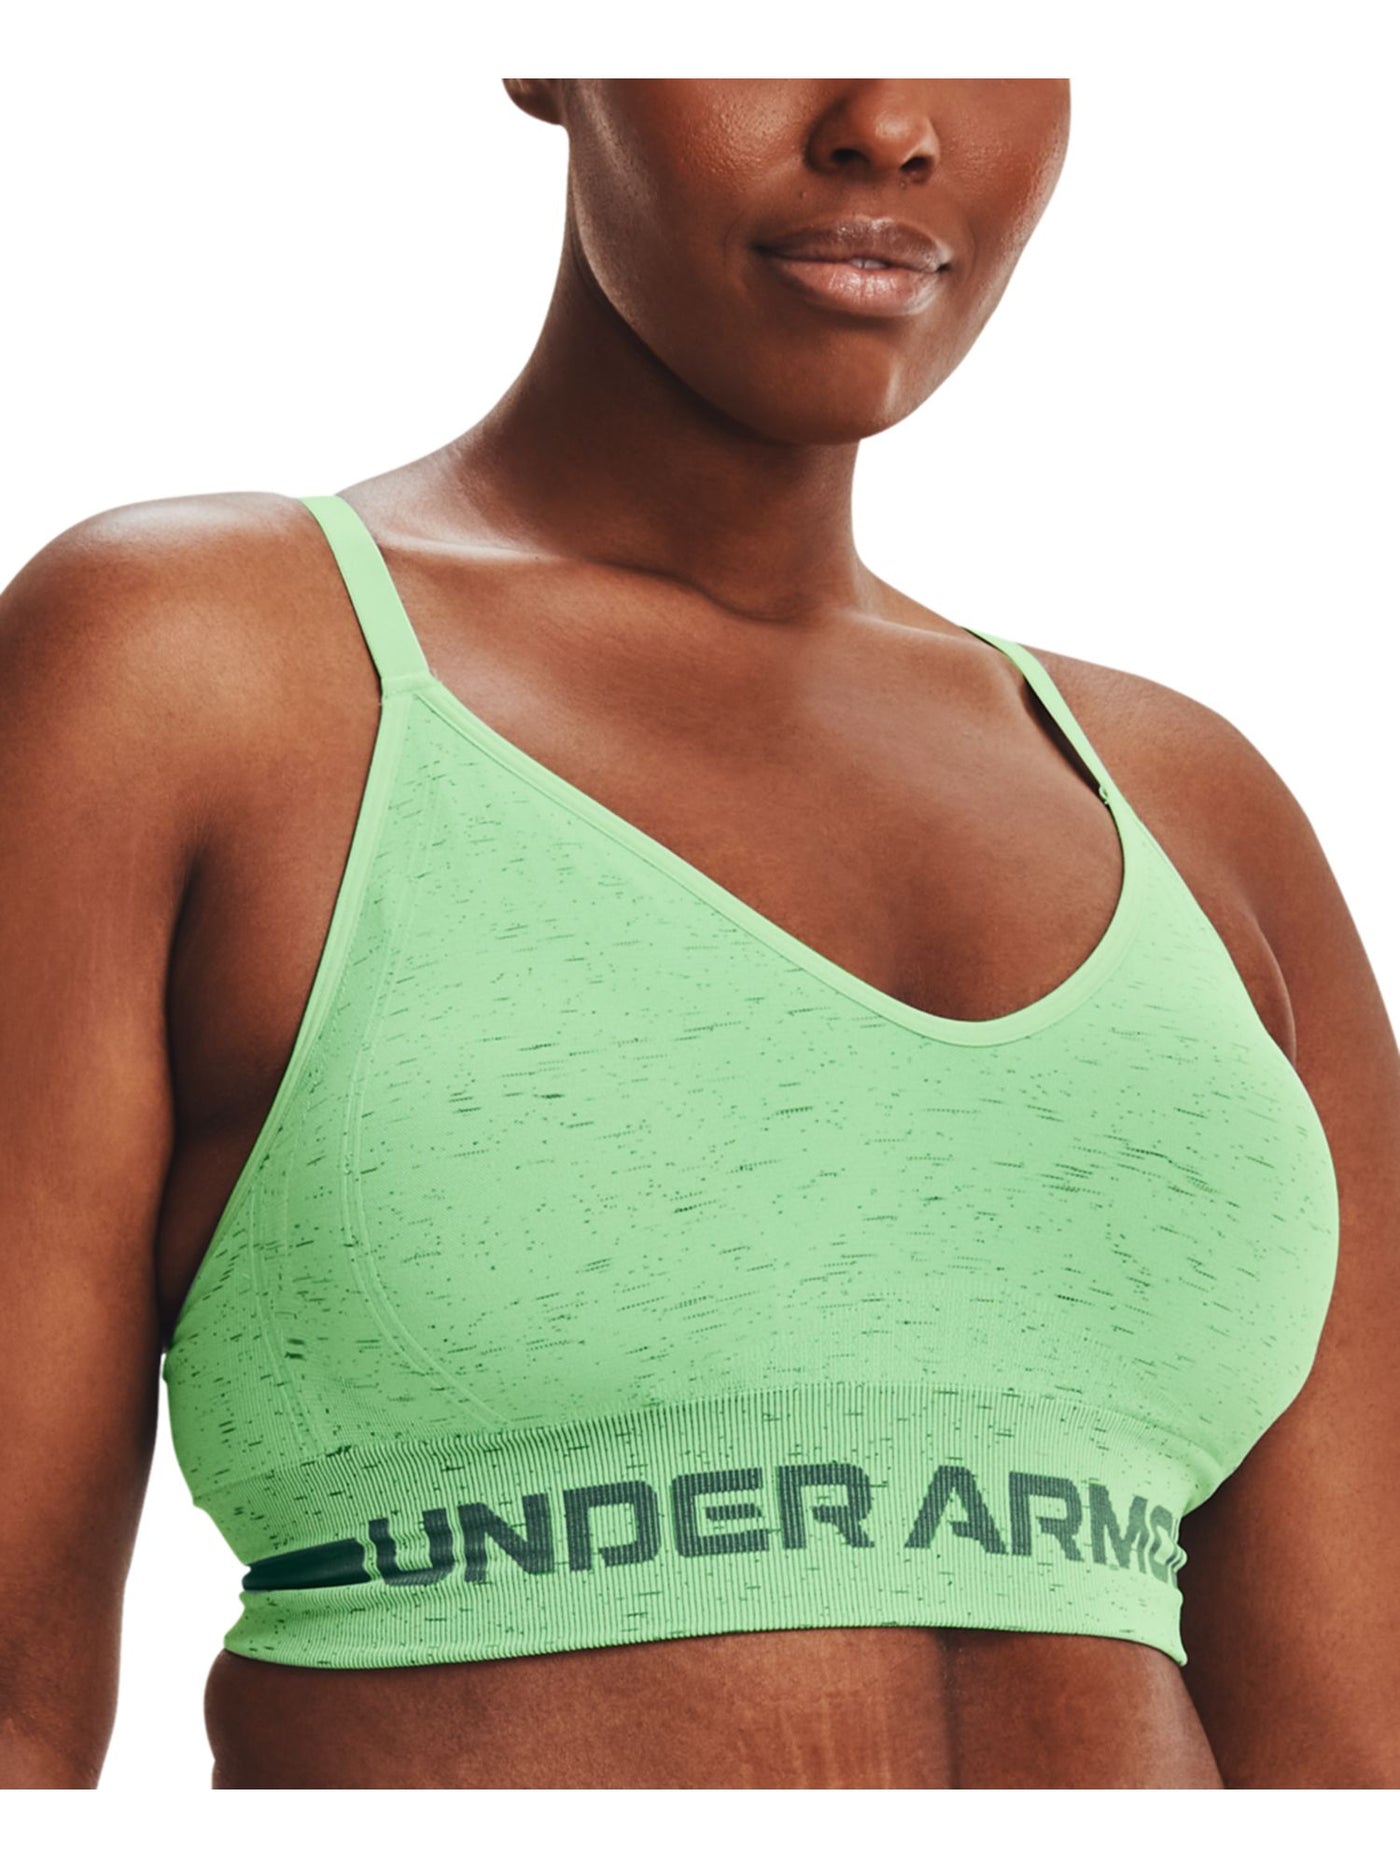 UNDER ARMOUR Intimates Green Ribbed Strappy Light Support Compression Sports Bra XS